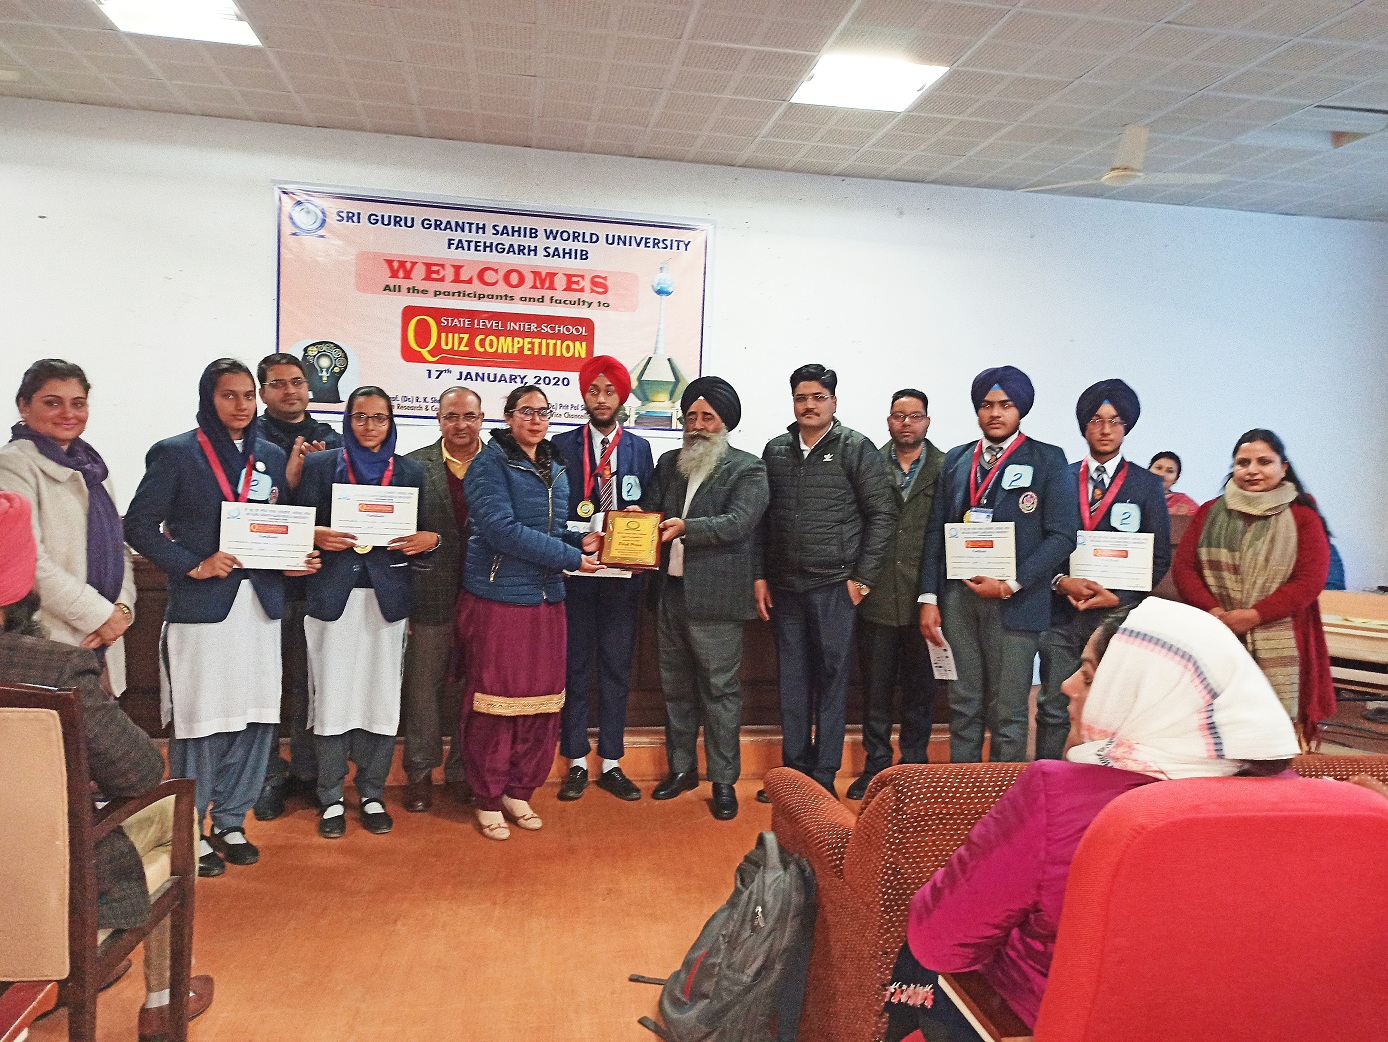 World University organised state level inter-school quiz competitions